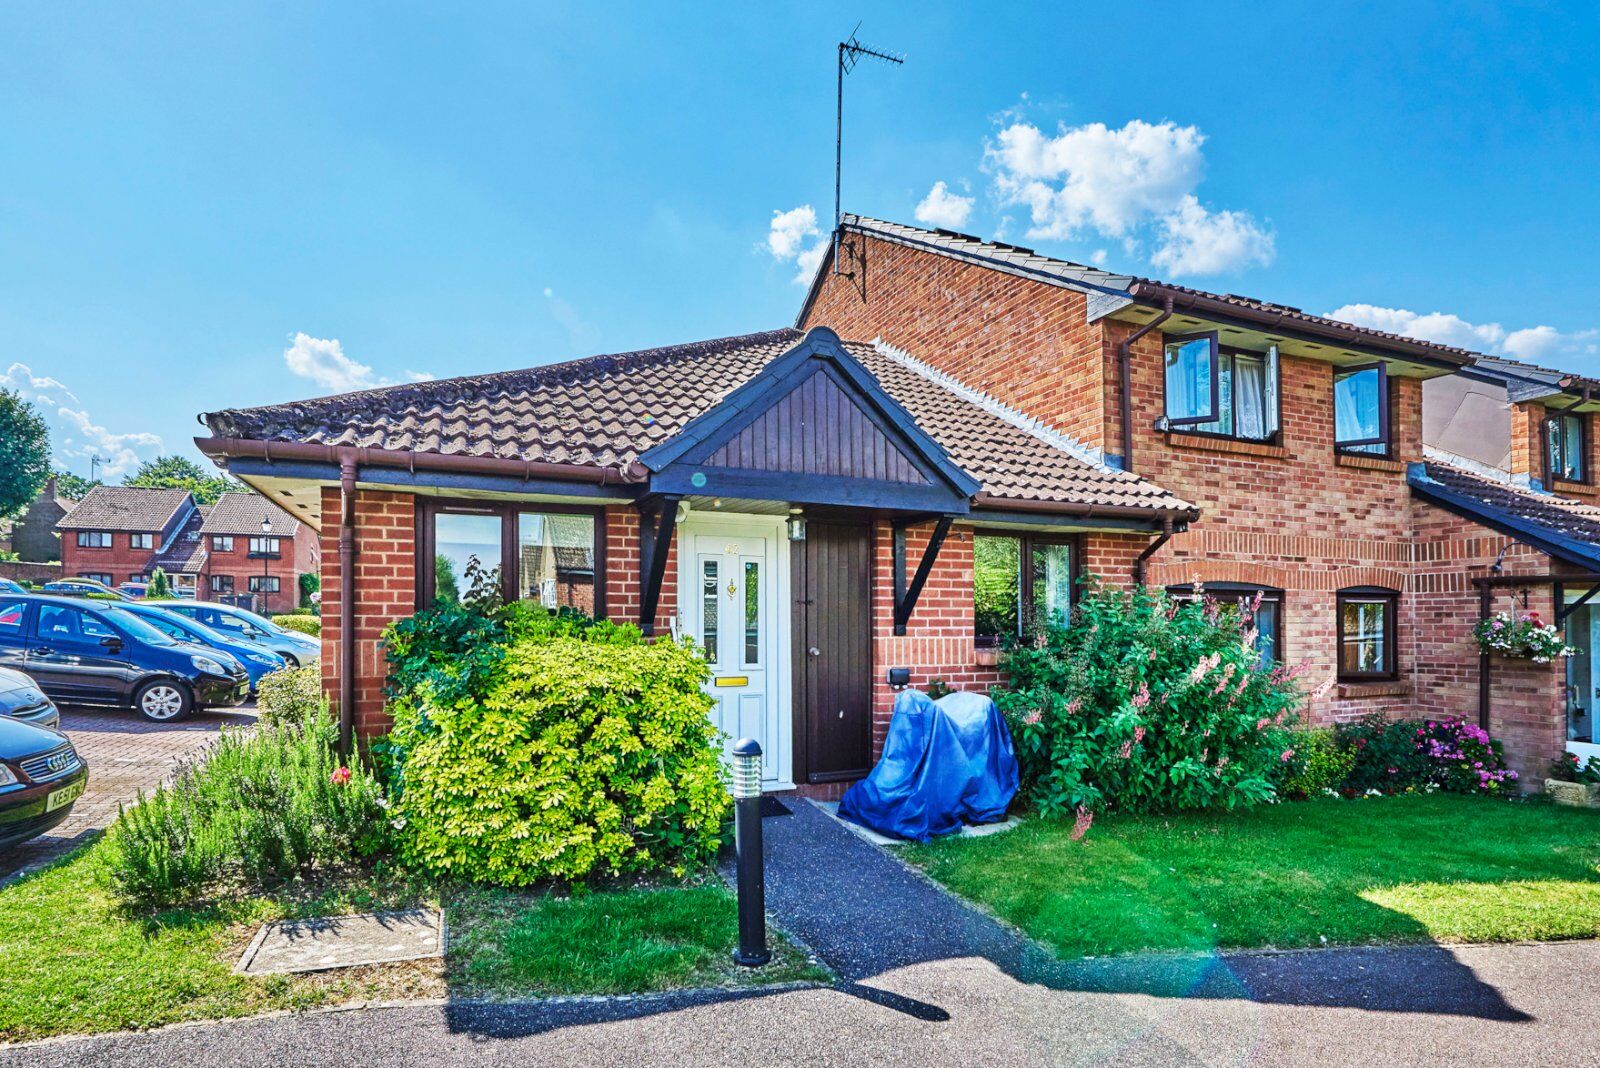 2 bedroom end terraced bungalow for sale Four Limes, Wheathampstead, AL4, main image